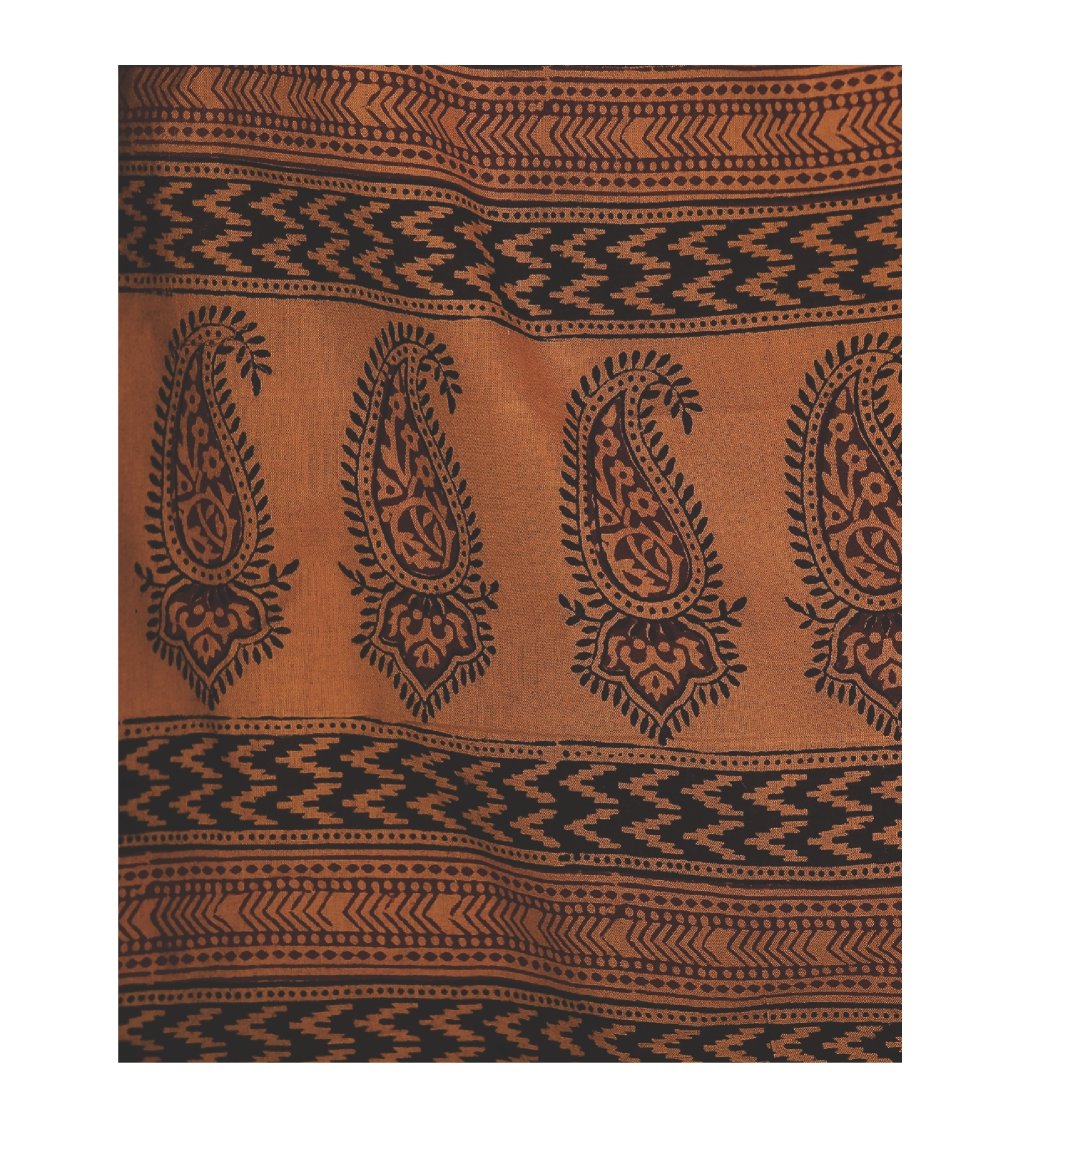 Orange Cotton Handblock Bagh Print Handcrafted Saree-Saree-Kalakari India-ZIBASA0029-Bagh, Cotton, Geographical Indication, Hand Blocks, Hand Crafted, Heritage Prints, Natural Dyes, Sarees, Sustainable Fabrics-[Linen,Ethnic,wear,Fashionista,Handloom,Handicraft,Indigo,blockprint,block,print,Cotton,Chanderi,Blue, latest,classy,party,bollywood,trendy,summer,style,traditional,formal,elegant,unique,style,hand,block,print, dabu,booti,gift,present,glamorous,affordable,collectible,Sari,Saree,printed, ho